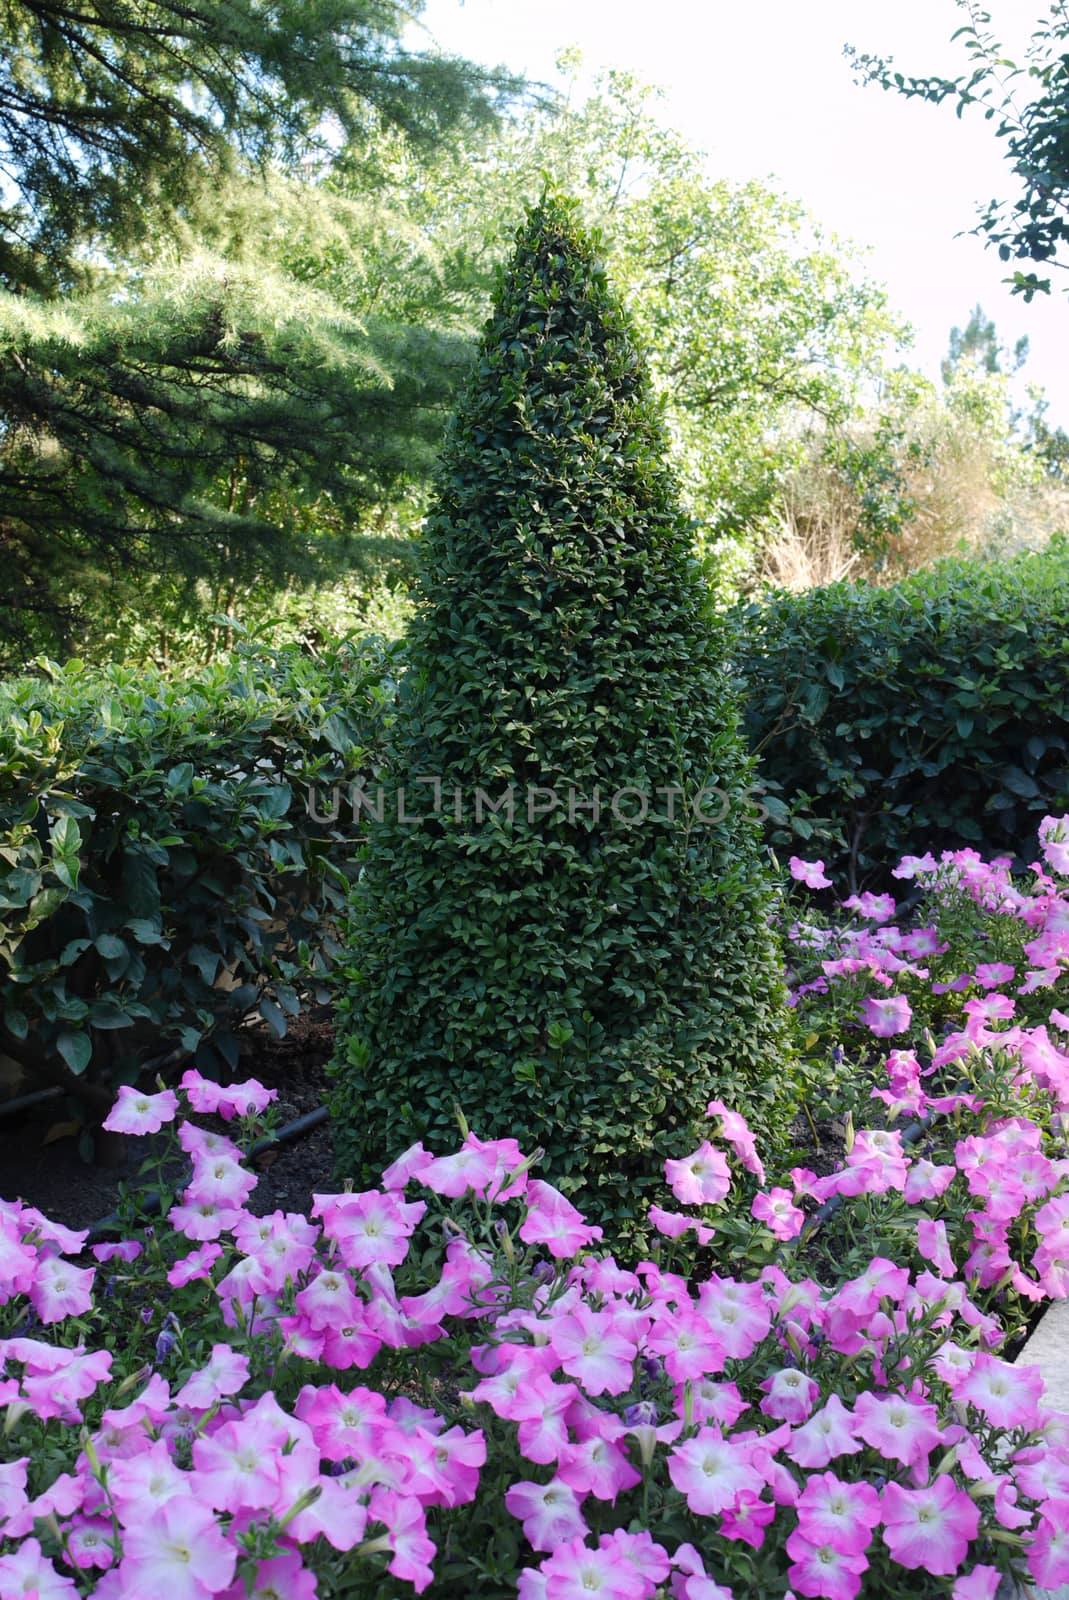 A tall ornately trimmed green bush with flower beds with small p by Adamchuk